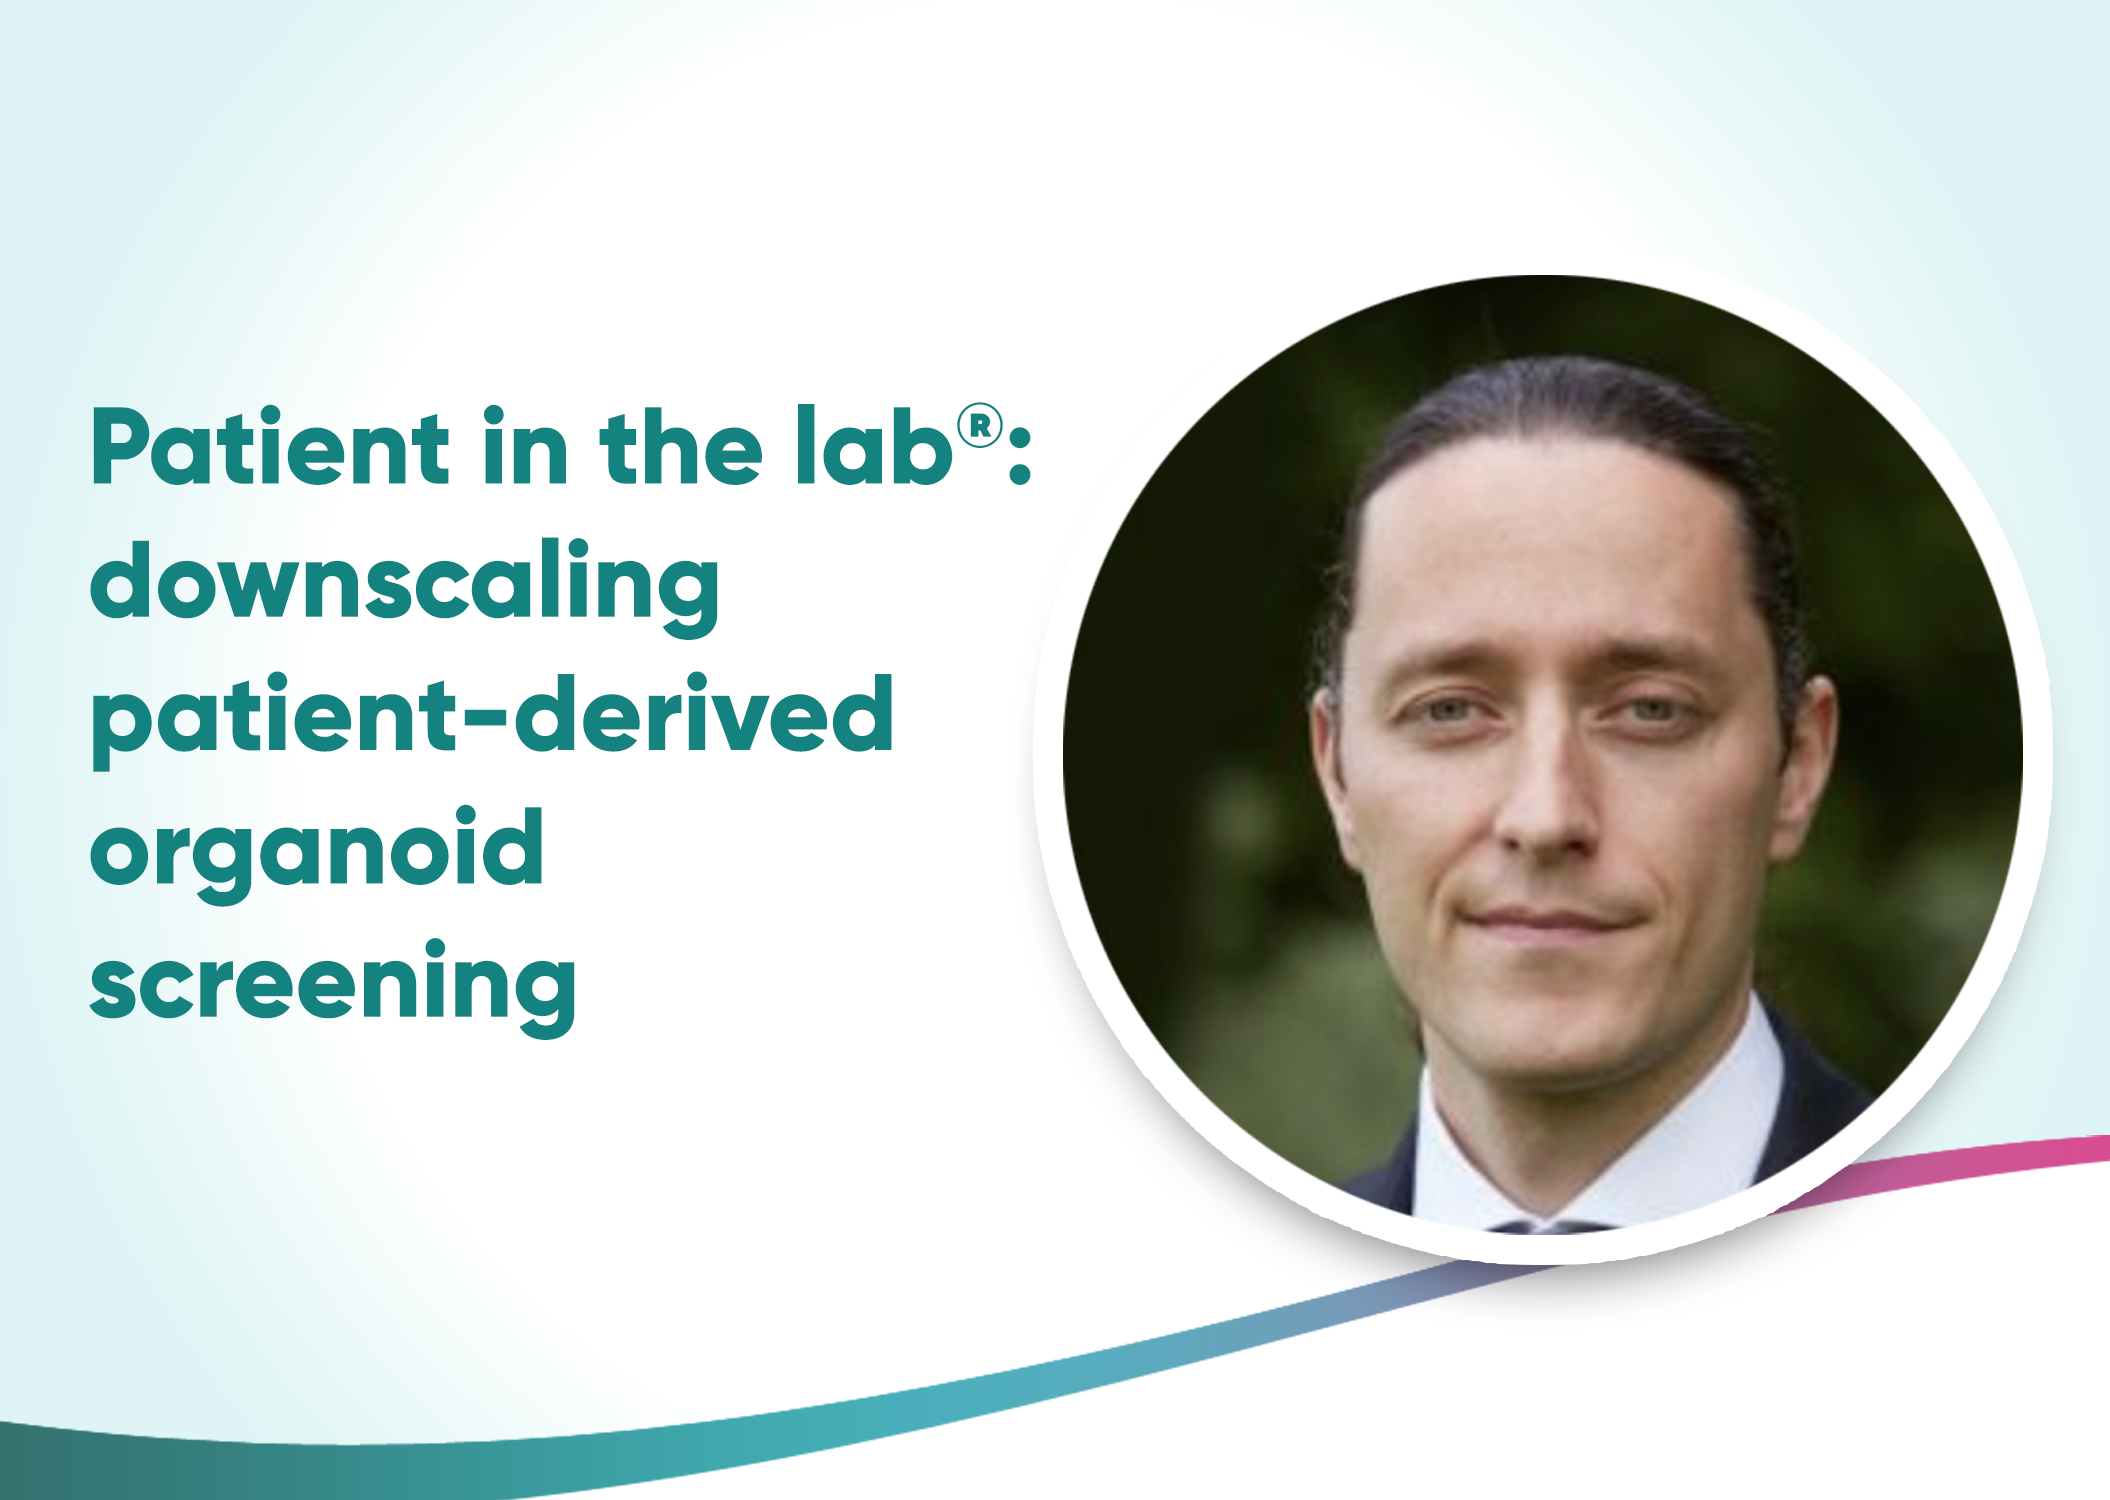 Patient in the lab®: downscaling patient-derived organoid screening